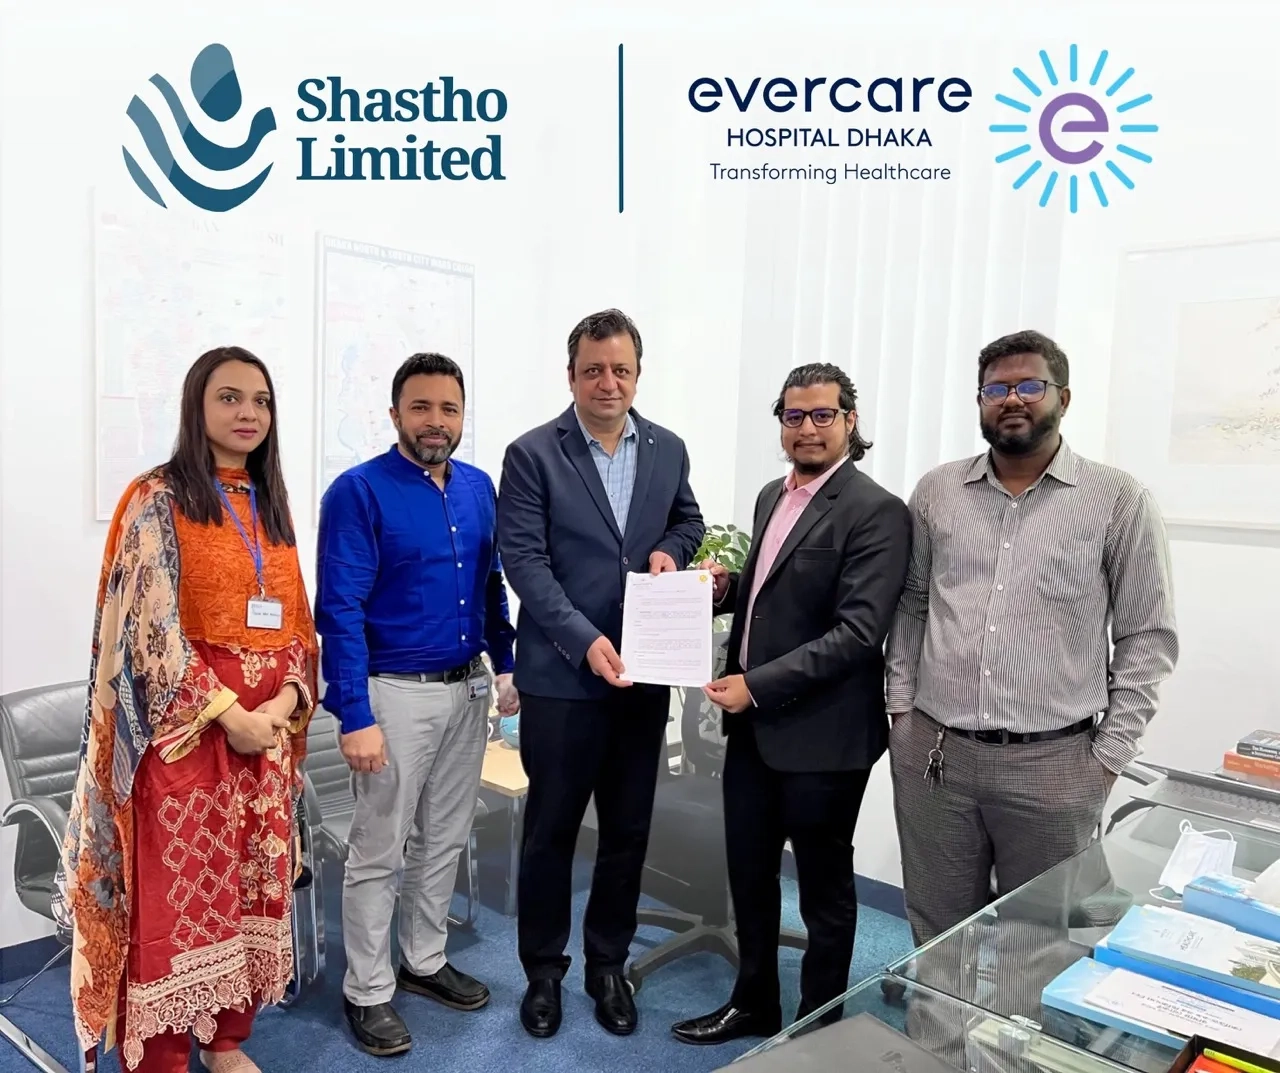 Partnership with Evercare